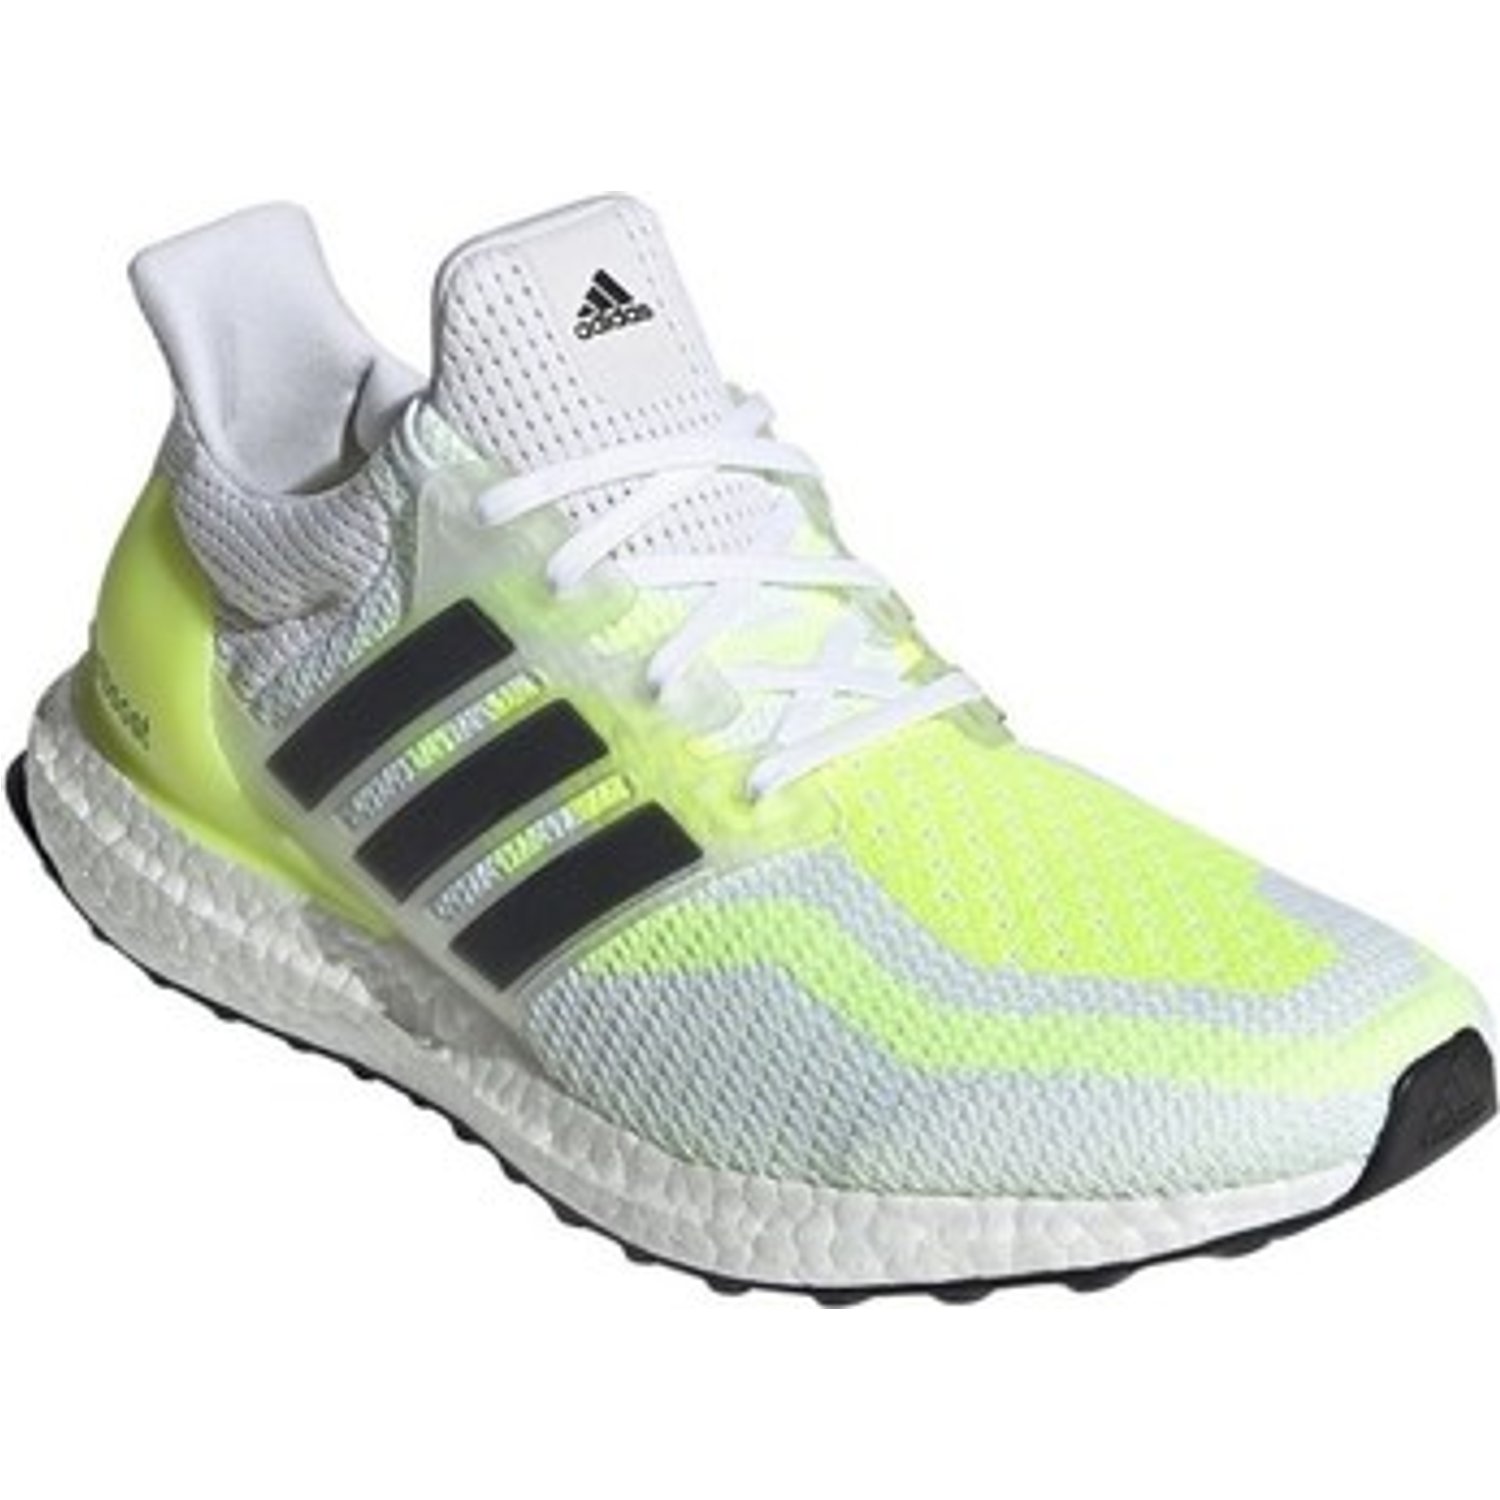 adidas UltraBOOST DNA CC_2 Climacool 2.0 GY1975 Release Info